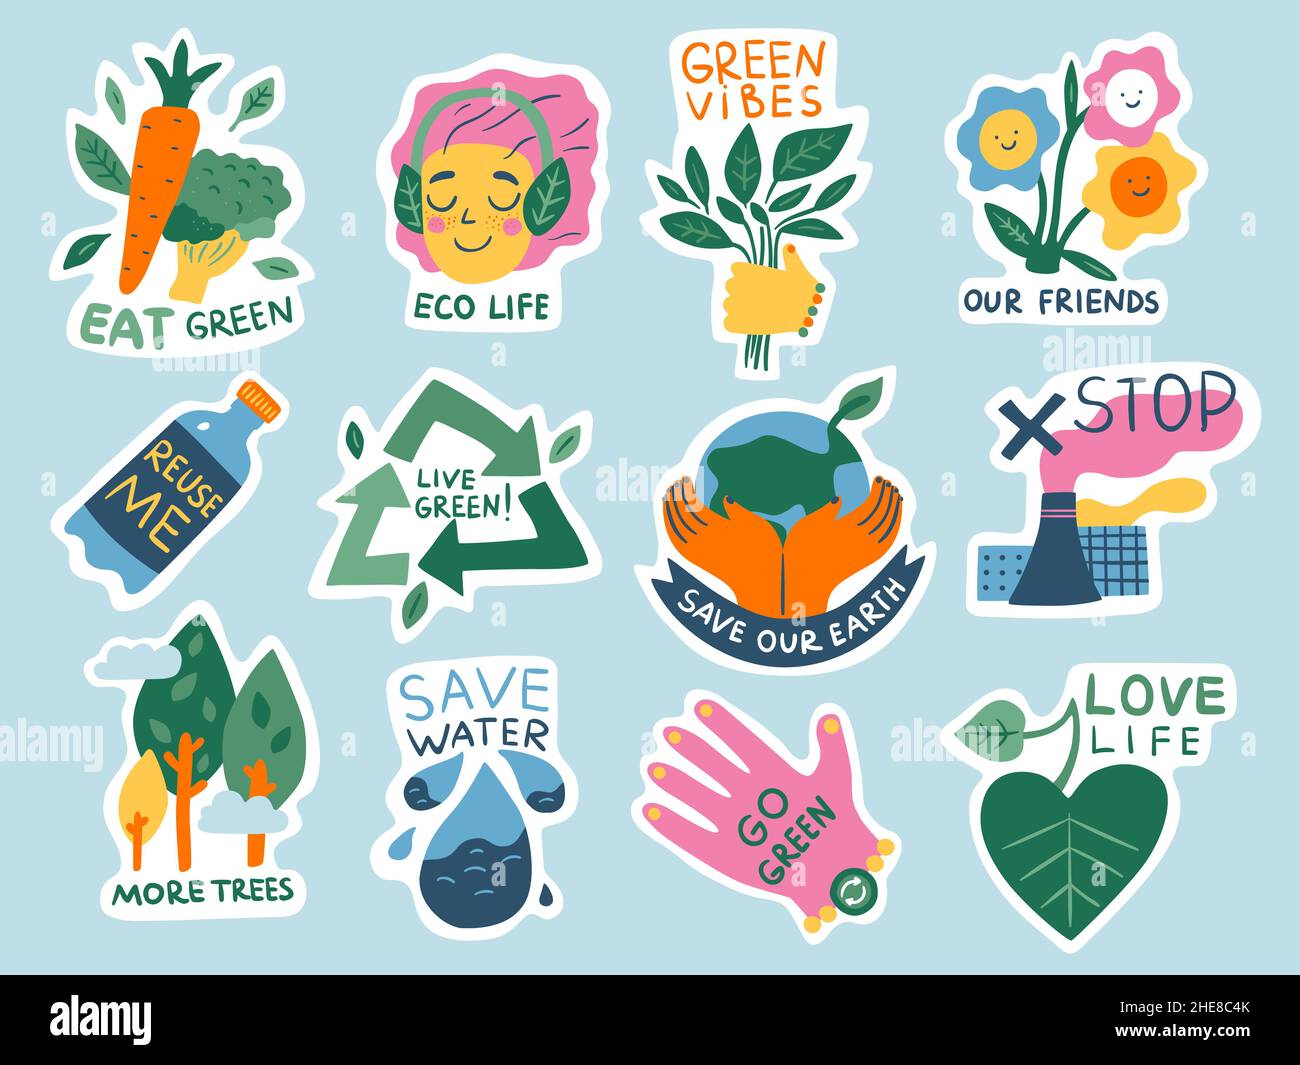 Ecology stickers. Green lifestyle. Eco and nature saving. Slogan and environment elements. Doodle style. Vegan eating. Stop pollution. Waste recycle Stock Vector